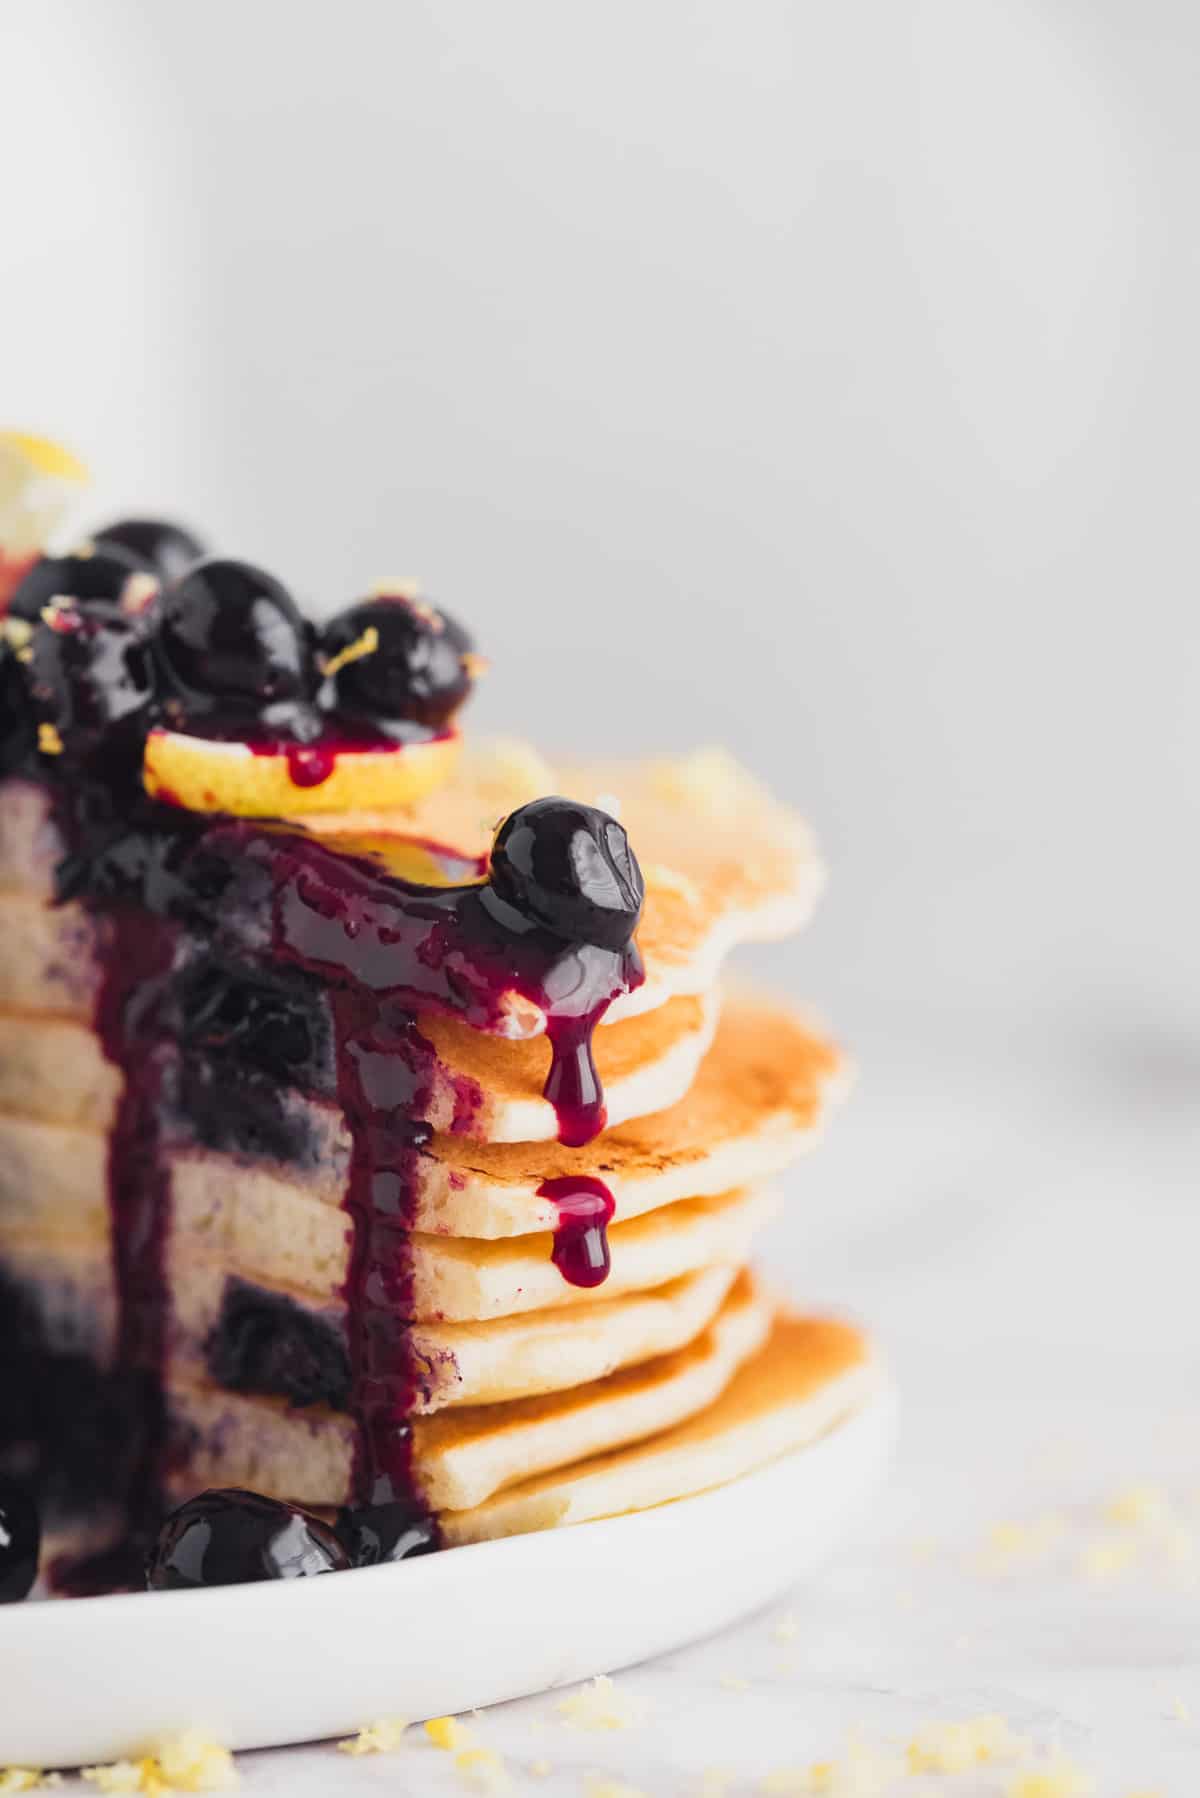 Blueberry sauce dripping down a stack of cut pancakes.